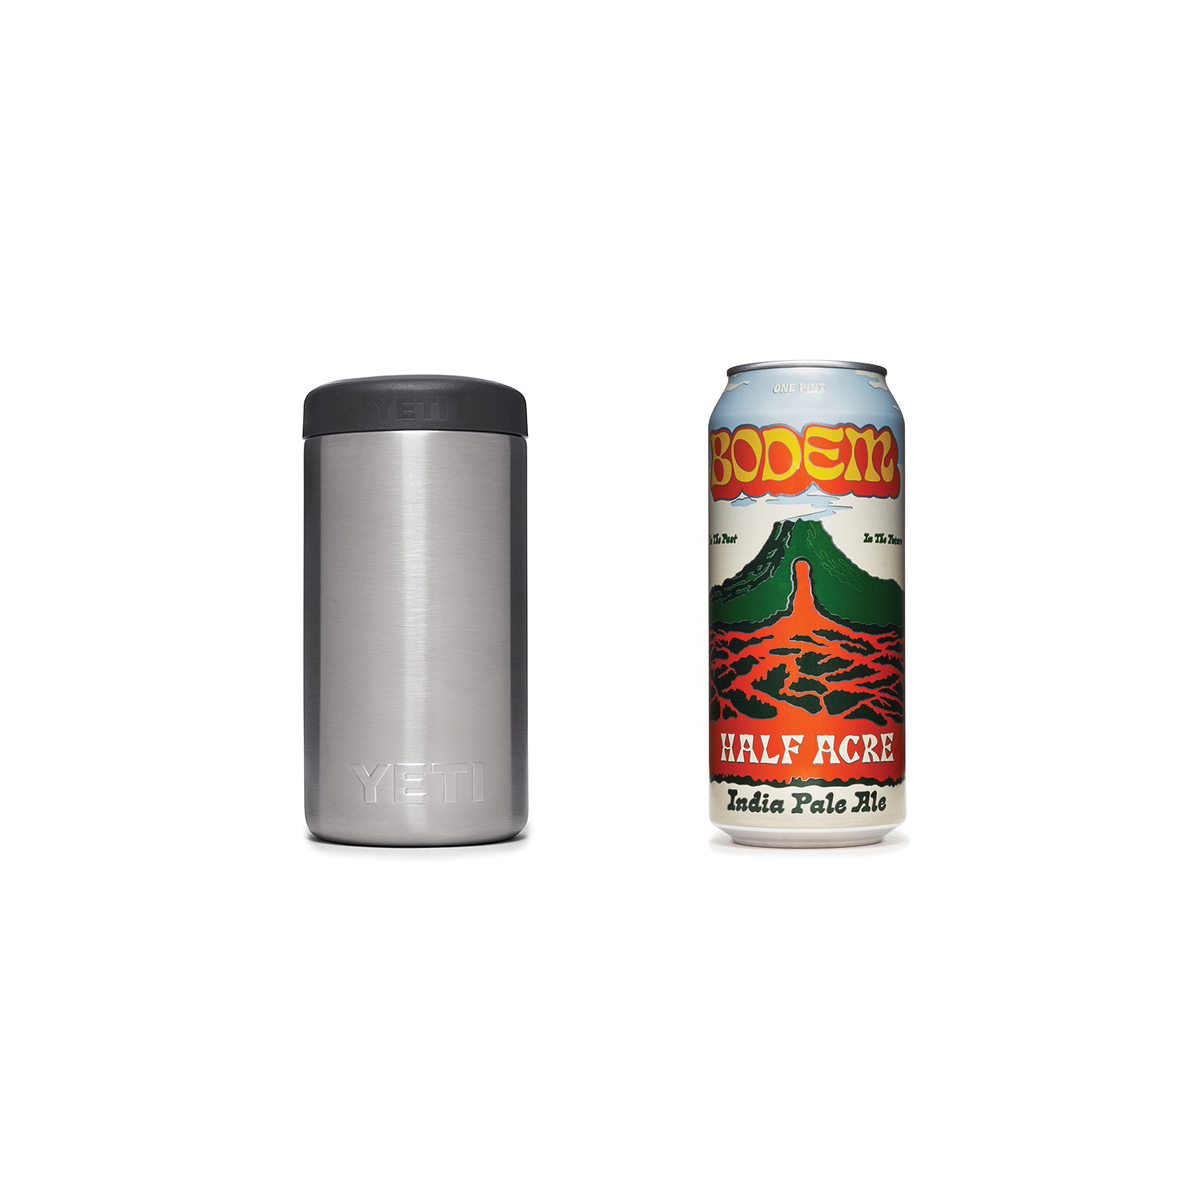 YETI Rambler 21070090051 Colster Can Insulator, 3 in Dia x 6 in H, 16 oz Can/Bottle, Stainless Steel, Black - 4